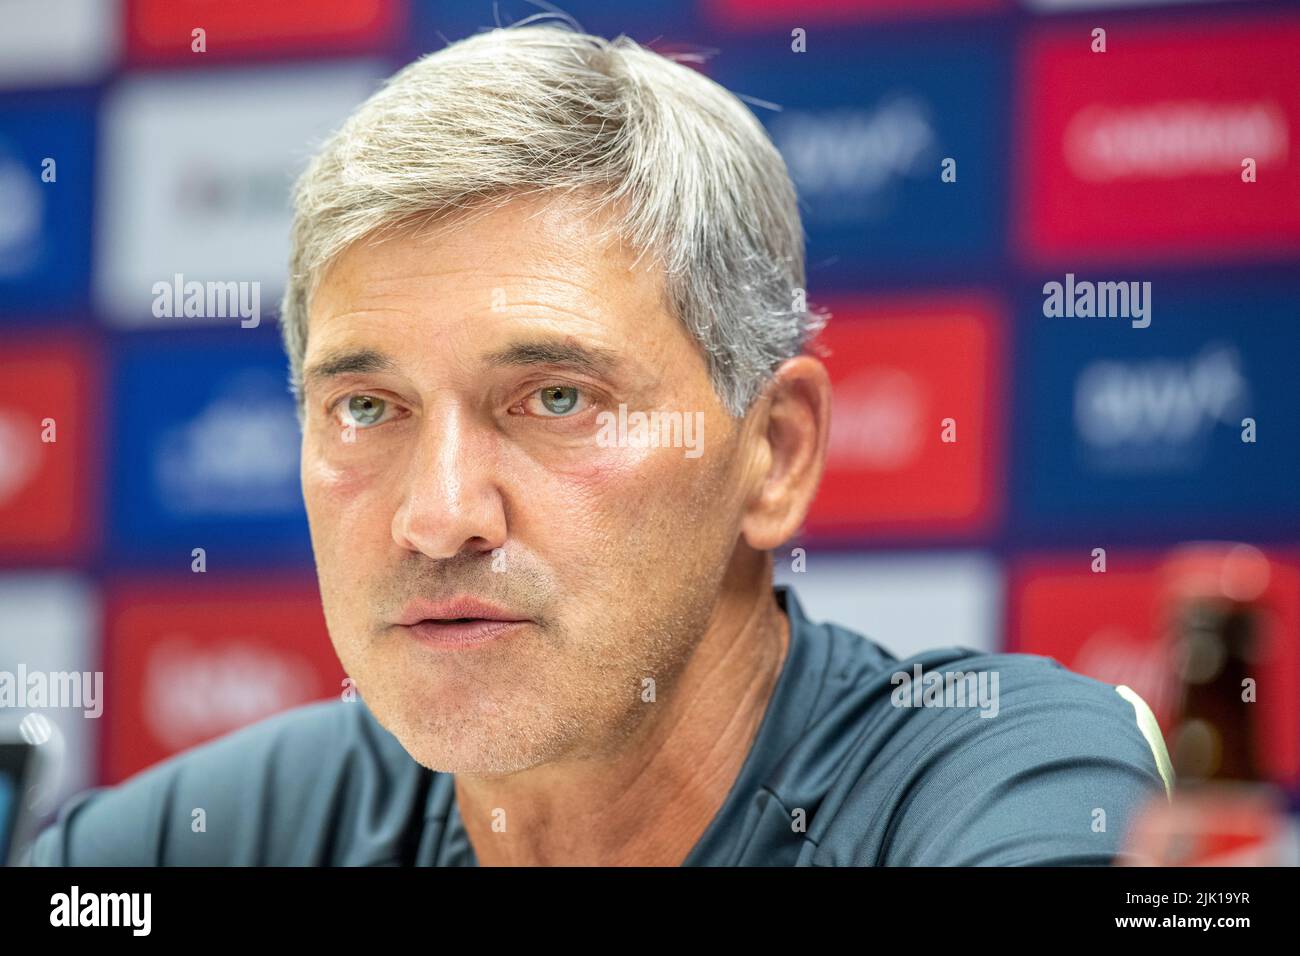 Brussels, Belgium. 29th July, 2022. Anderlecht head coach Felice Mazzu pictured during the weekly press conference of Belgian soccer team RSC Anderlecht, Friday 29 July 2022 in Brussels, to discuss the next game in the national competition. BELGA PHOTO NICOLAS MAETERLINCK Credit: Belga News Agency/Alamy Live News Stock Photo